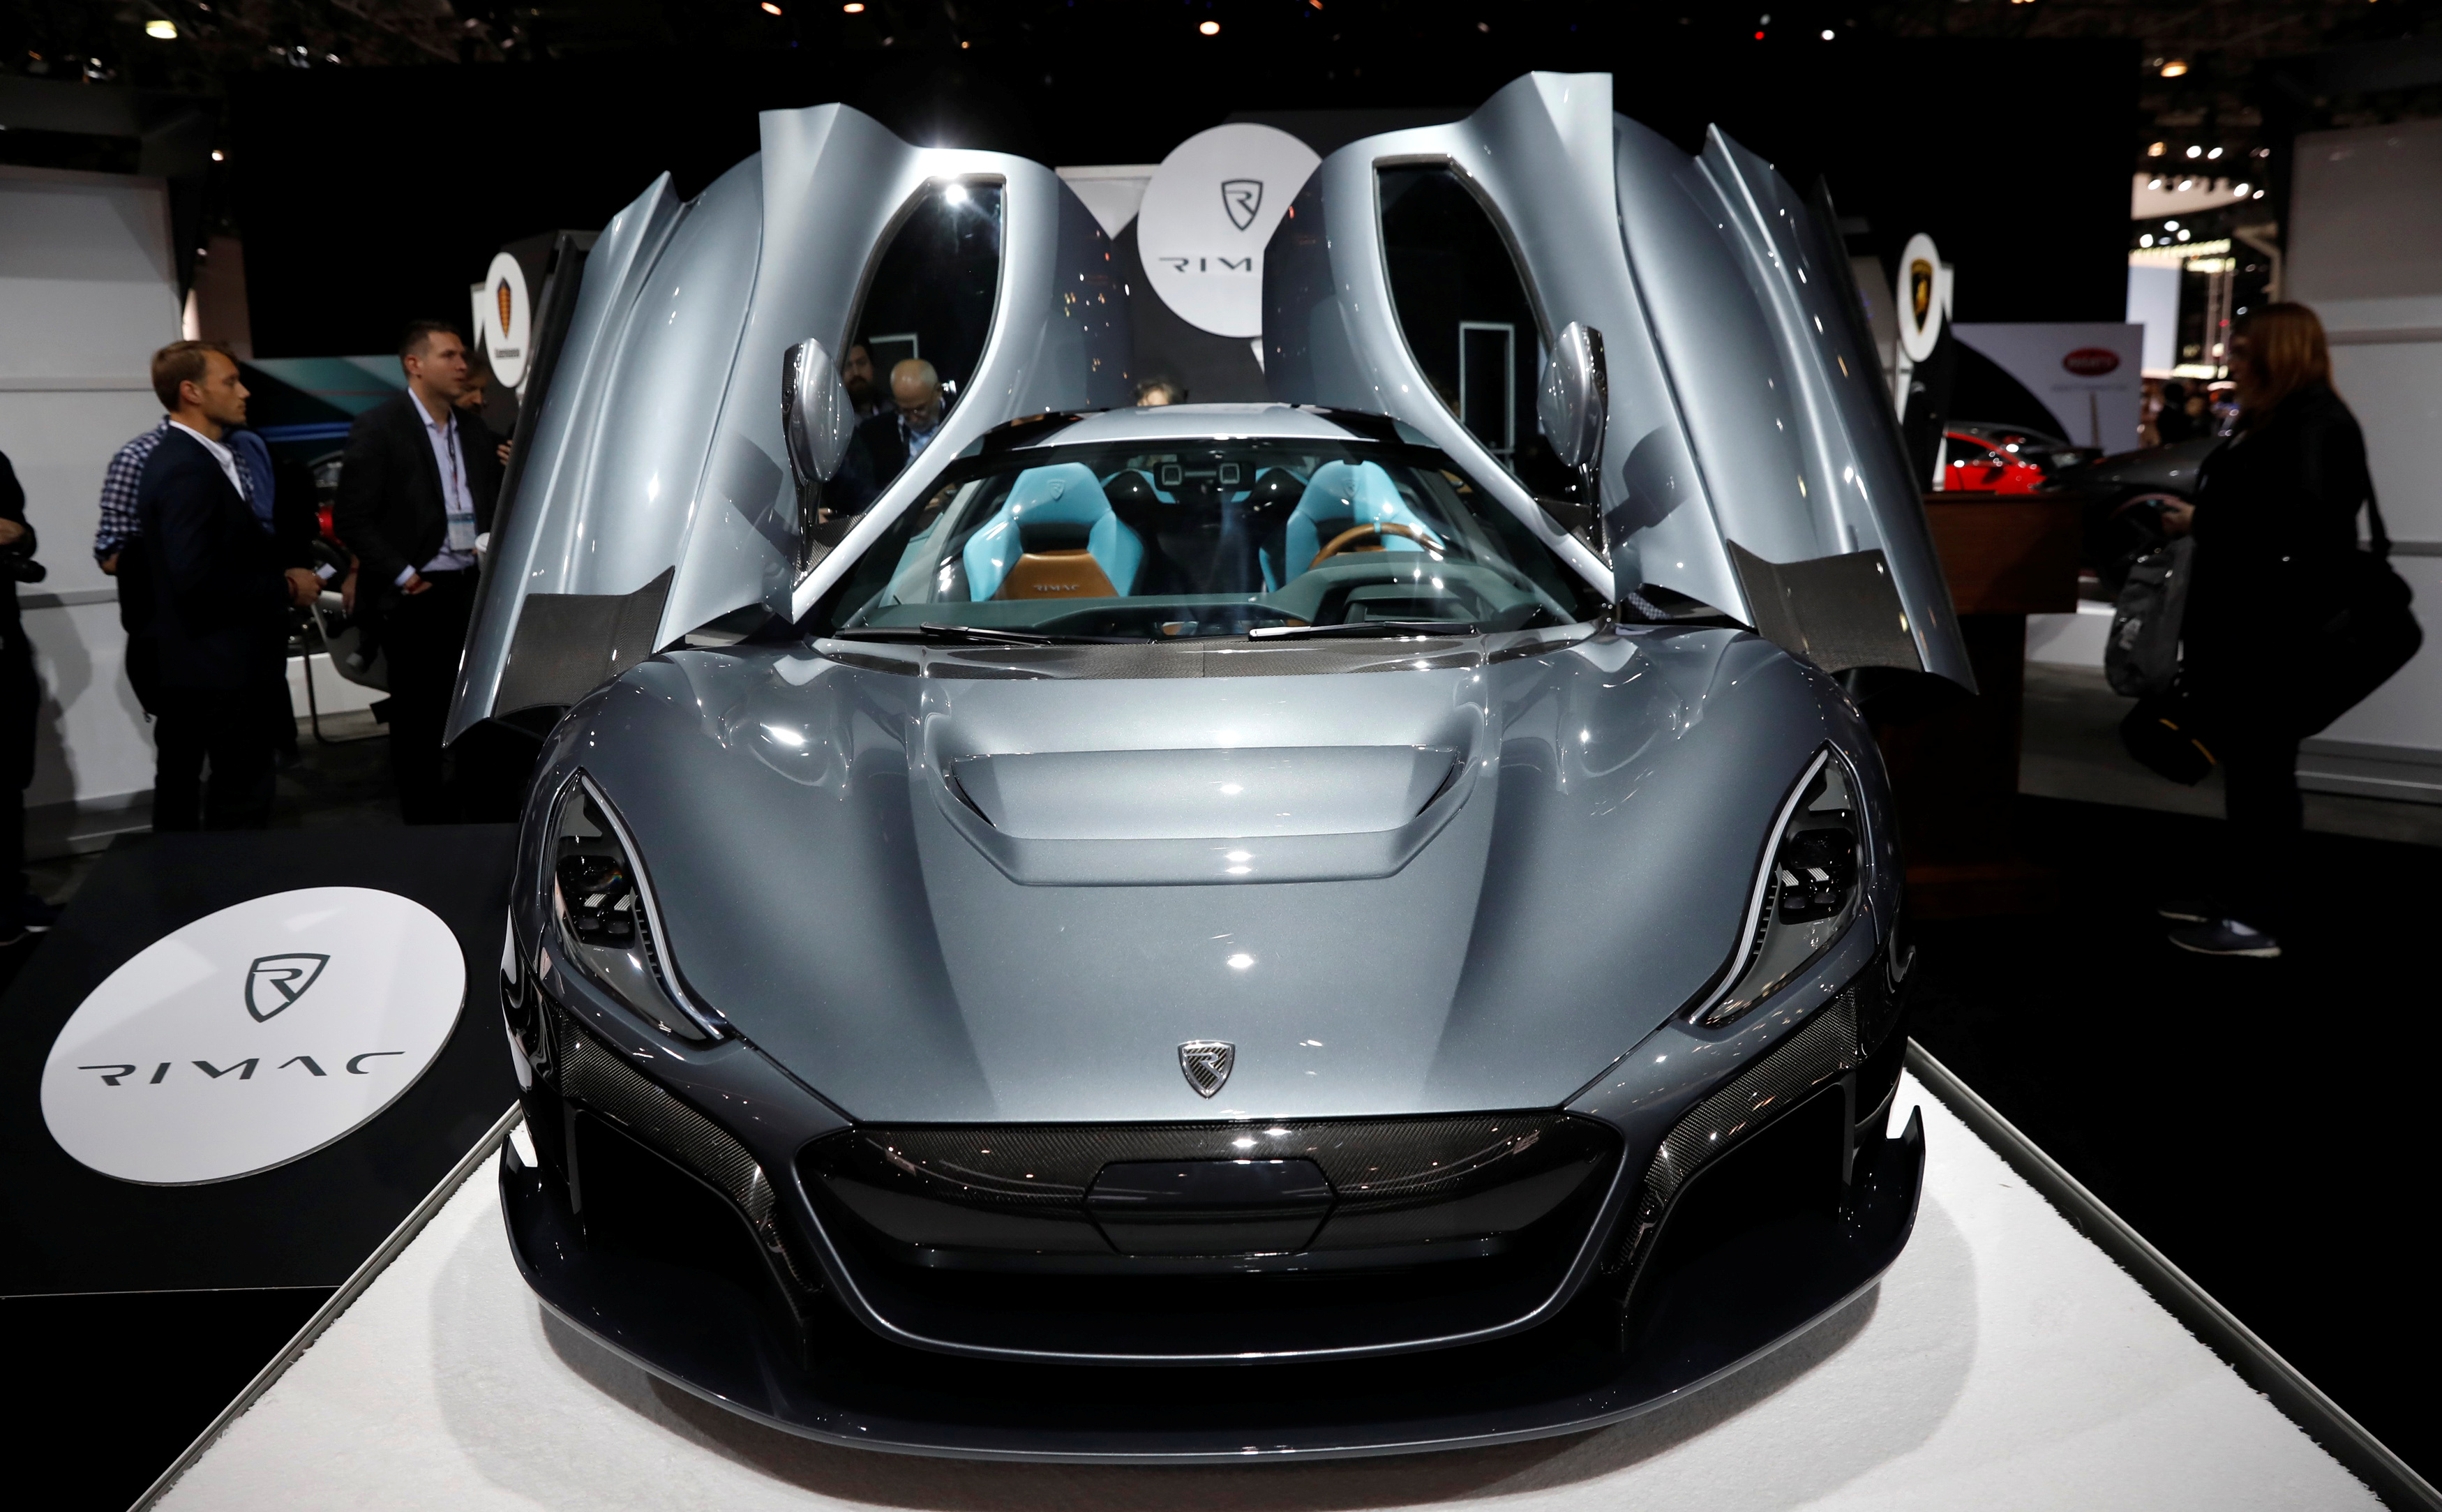 A 2019 Rimac C2 Hyper car is seen on display at the New York Auto Show in New York